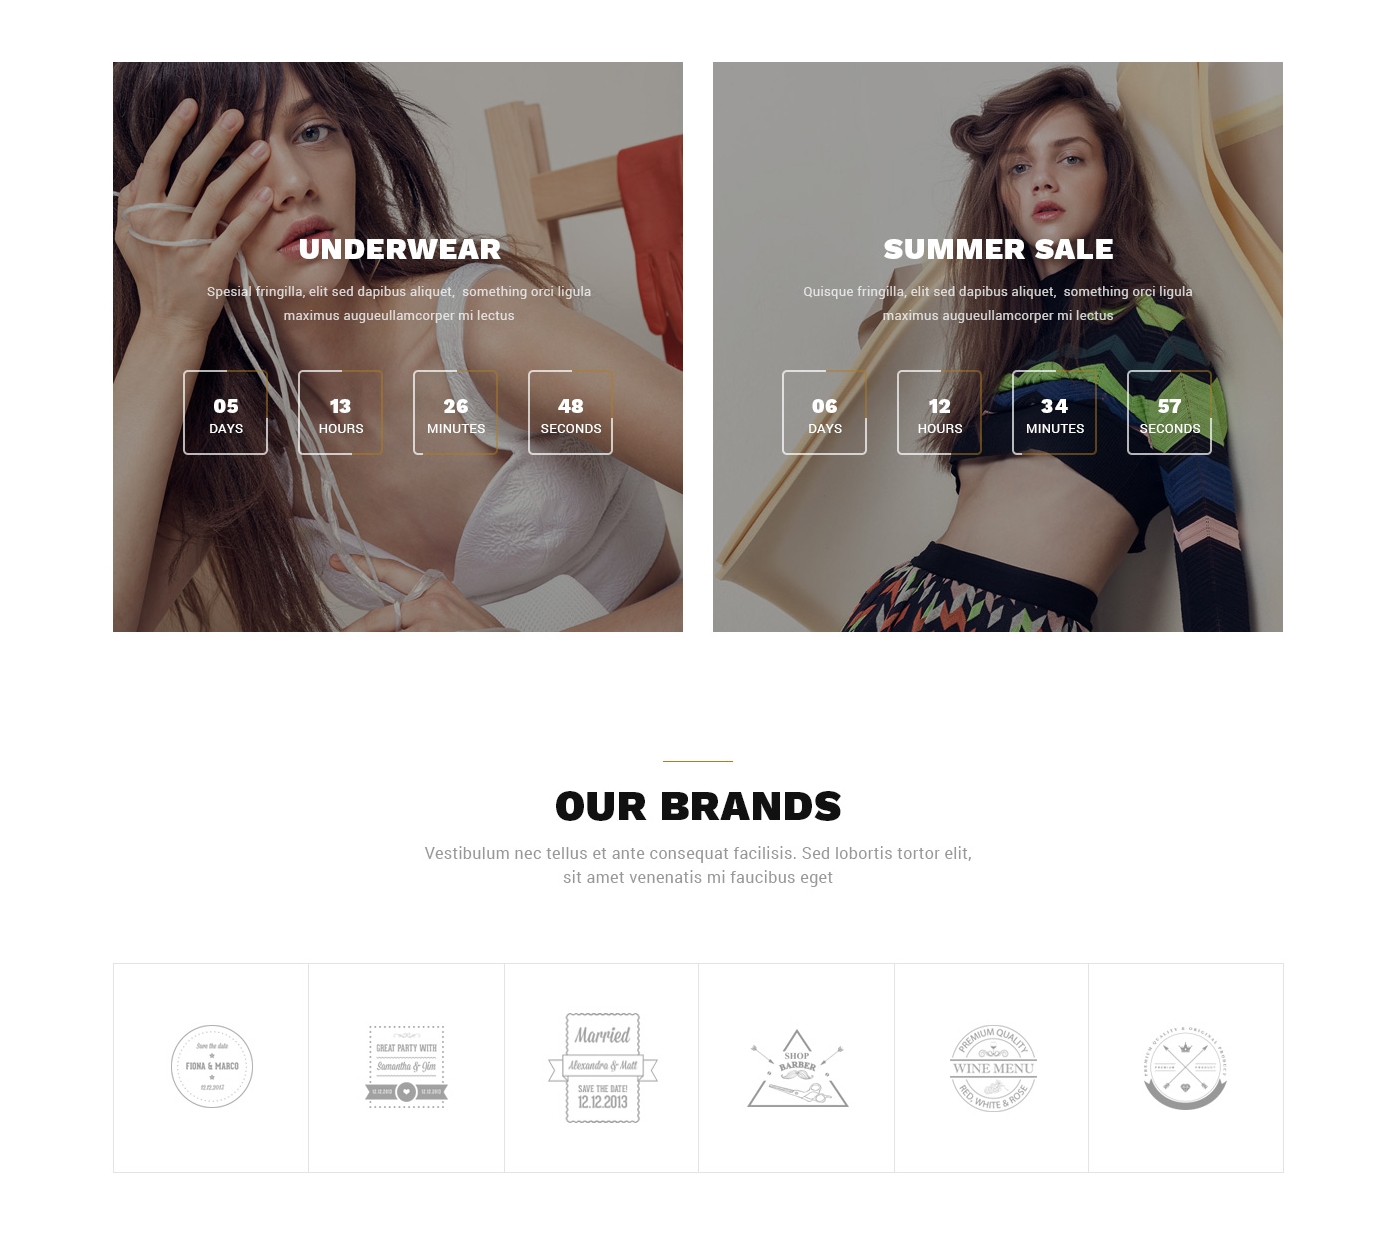 Responsive Bootstrap Store Theme